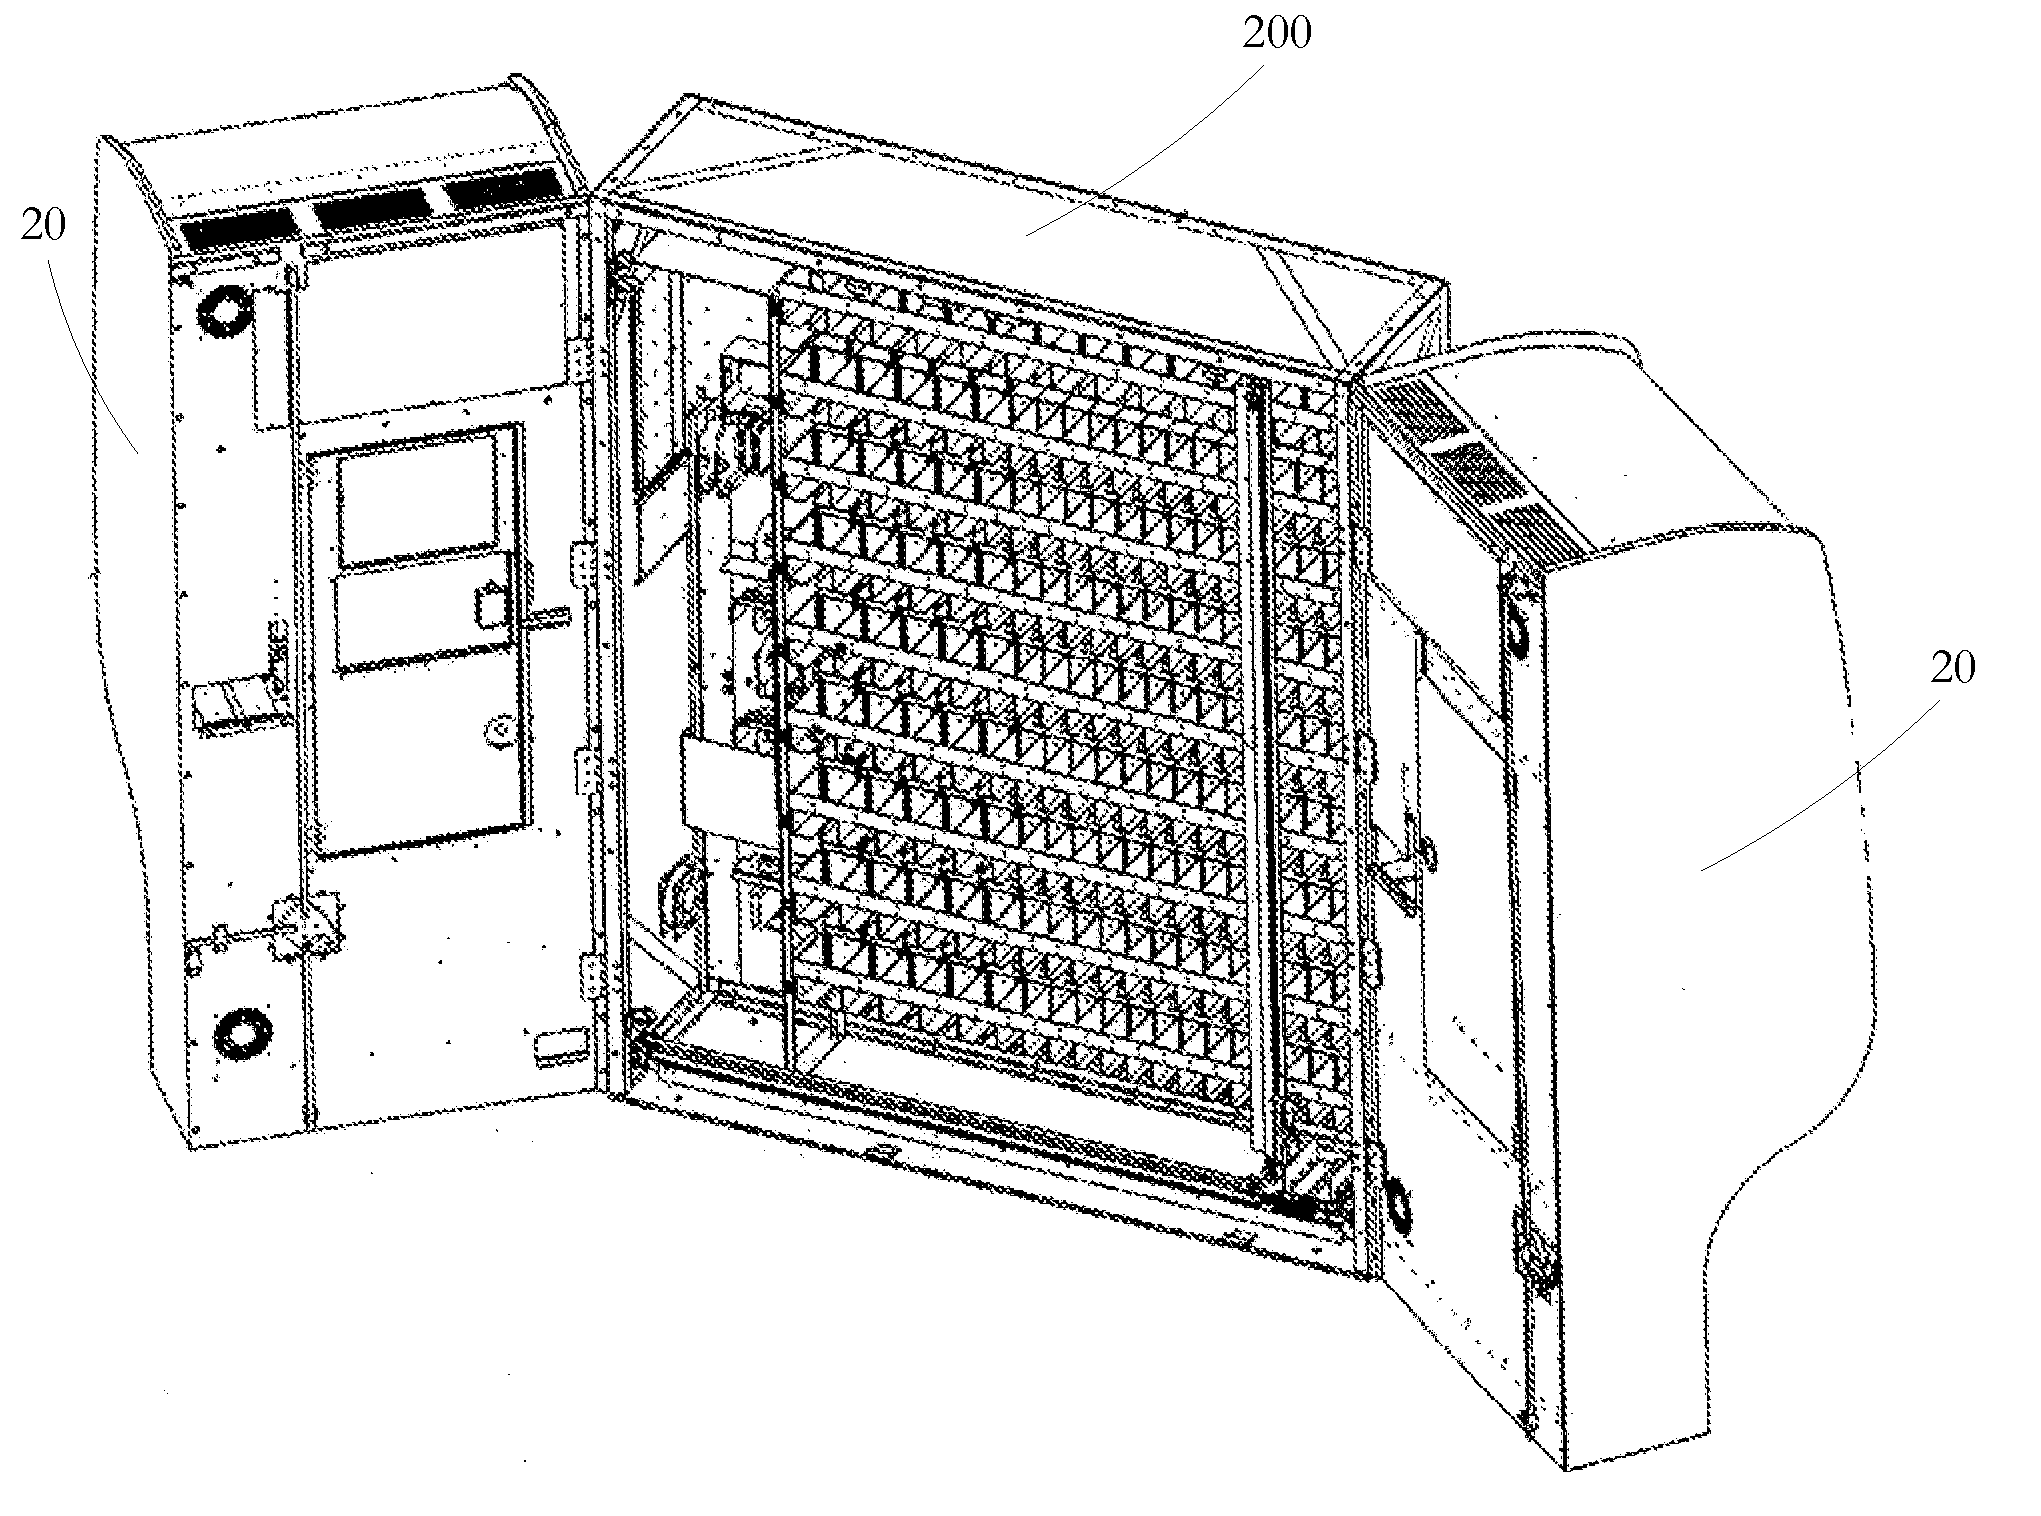 Automated Apparatus for Dispensing Medicaments